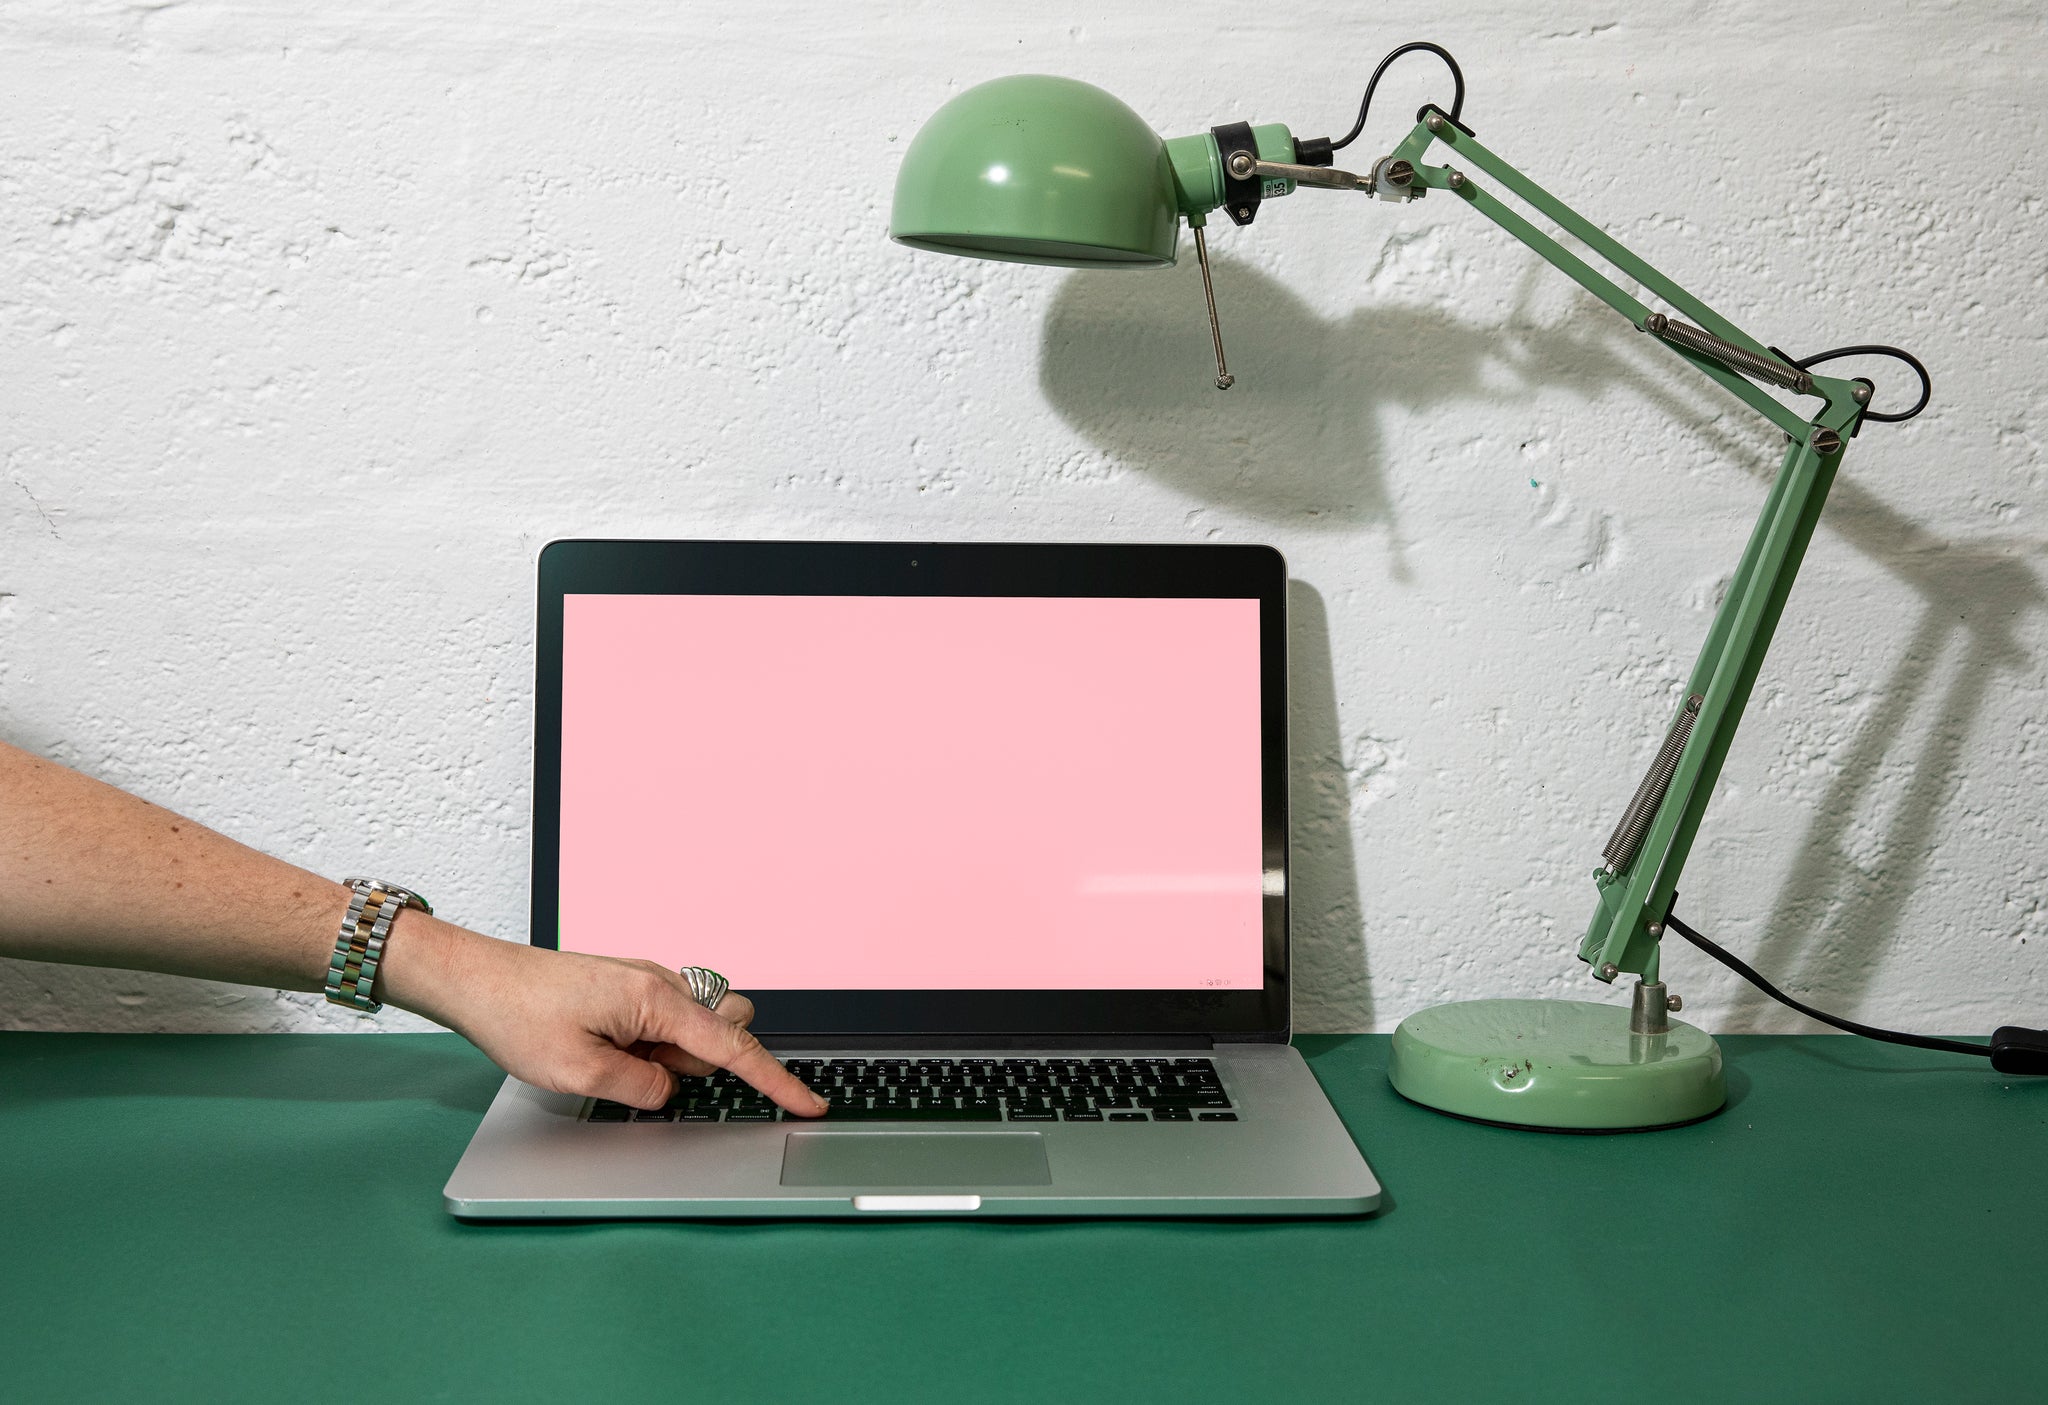 Laptop and green lamp sitting on a desk. Surface is a dark green. Laptop screen is up and a pink frame is on the screen, with a green grid line design. A womans hand is reaching into frame touching the keyboard. 